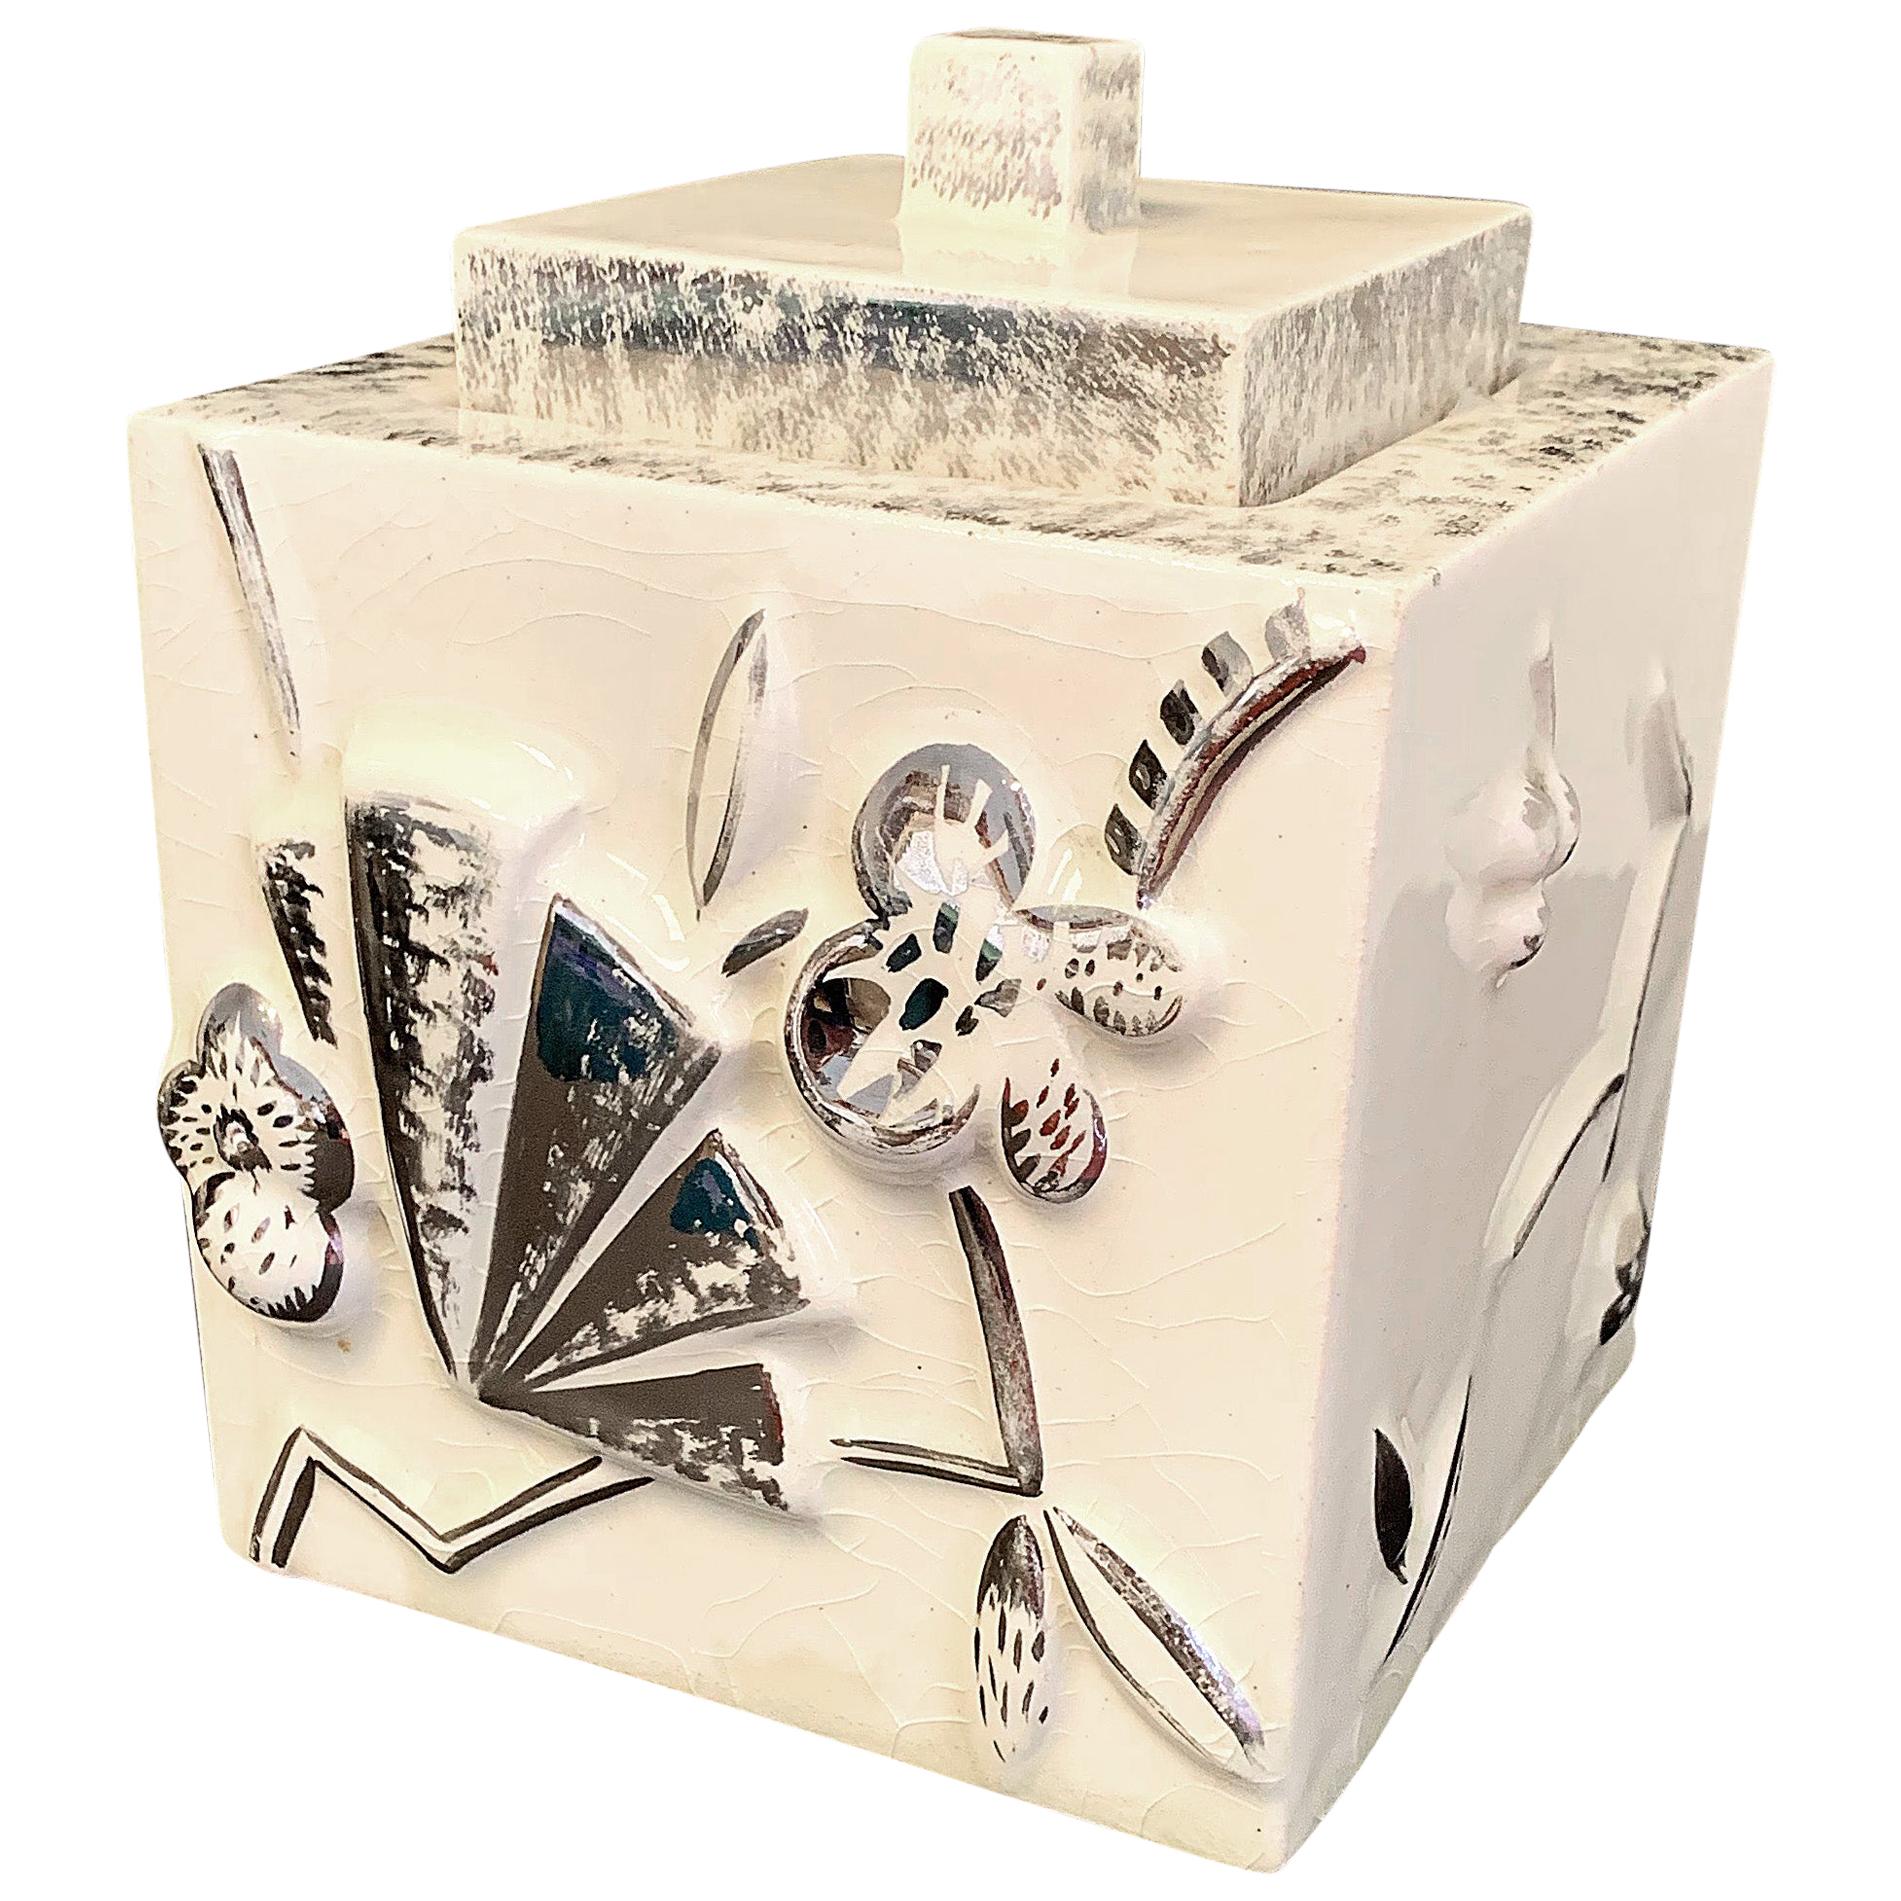 Rare Art Deco Lidded Box with Floral and Geometric Motifs, Silver and Ivory Hues For Sale